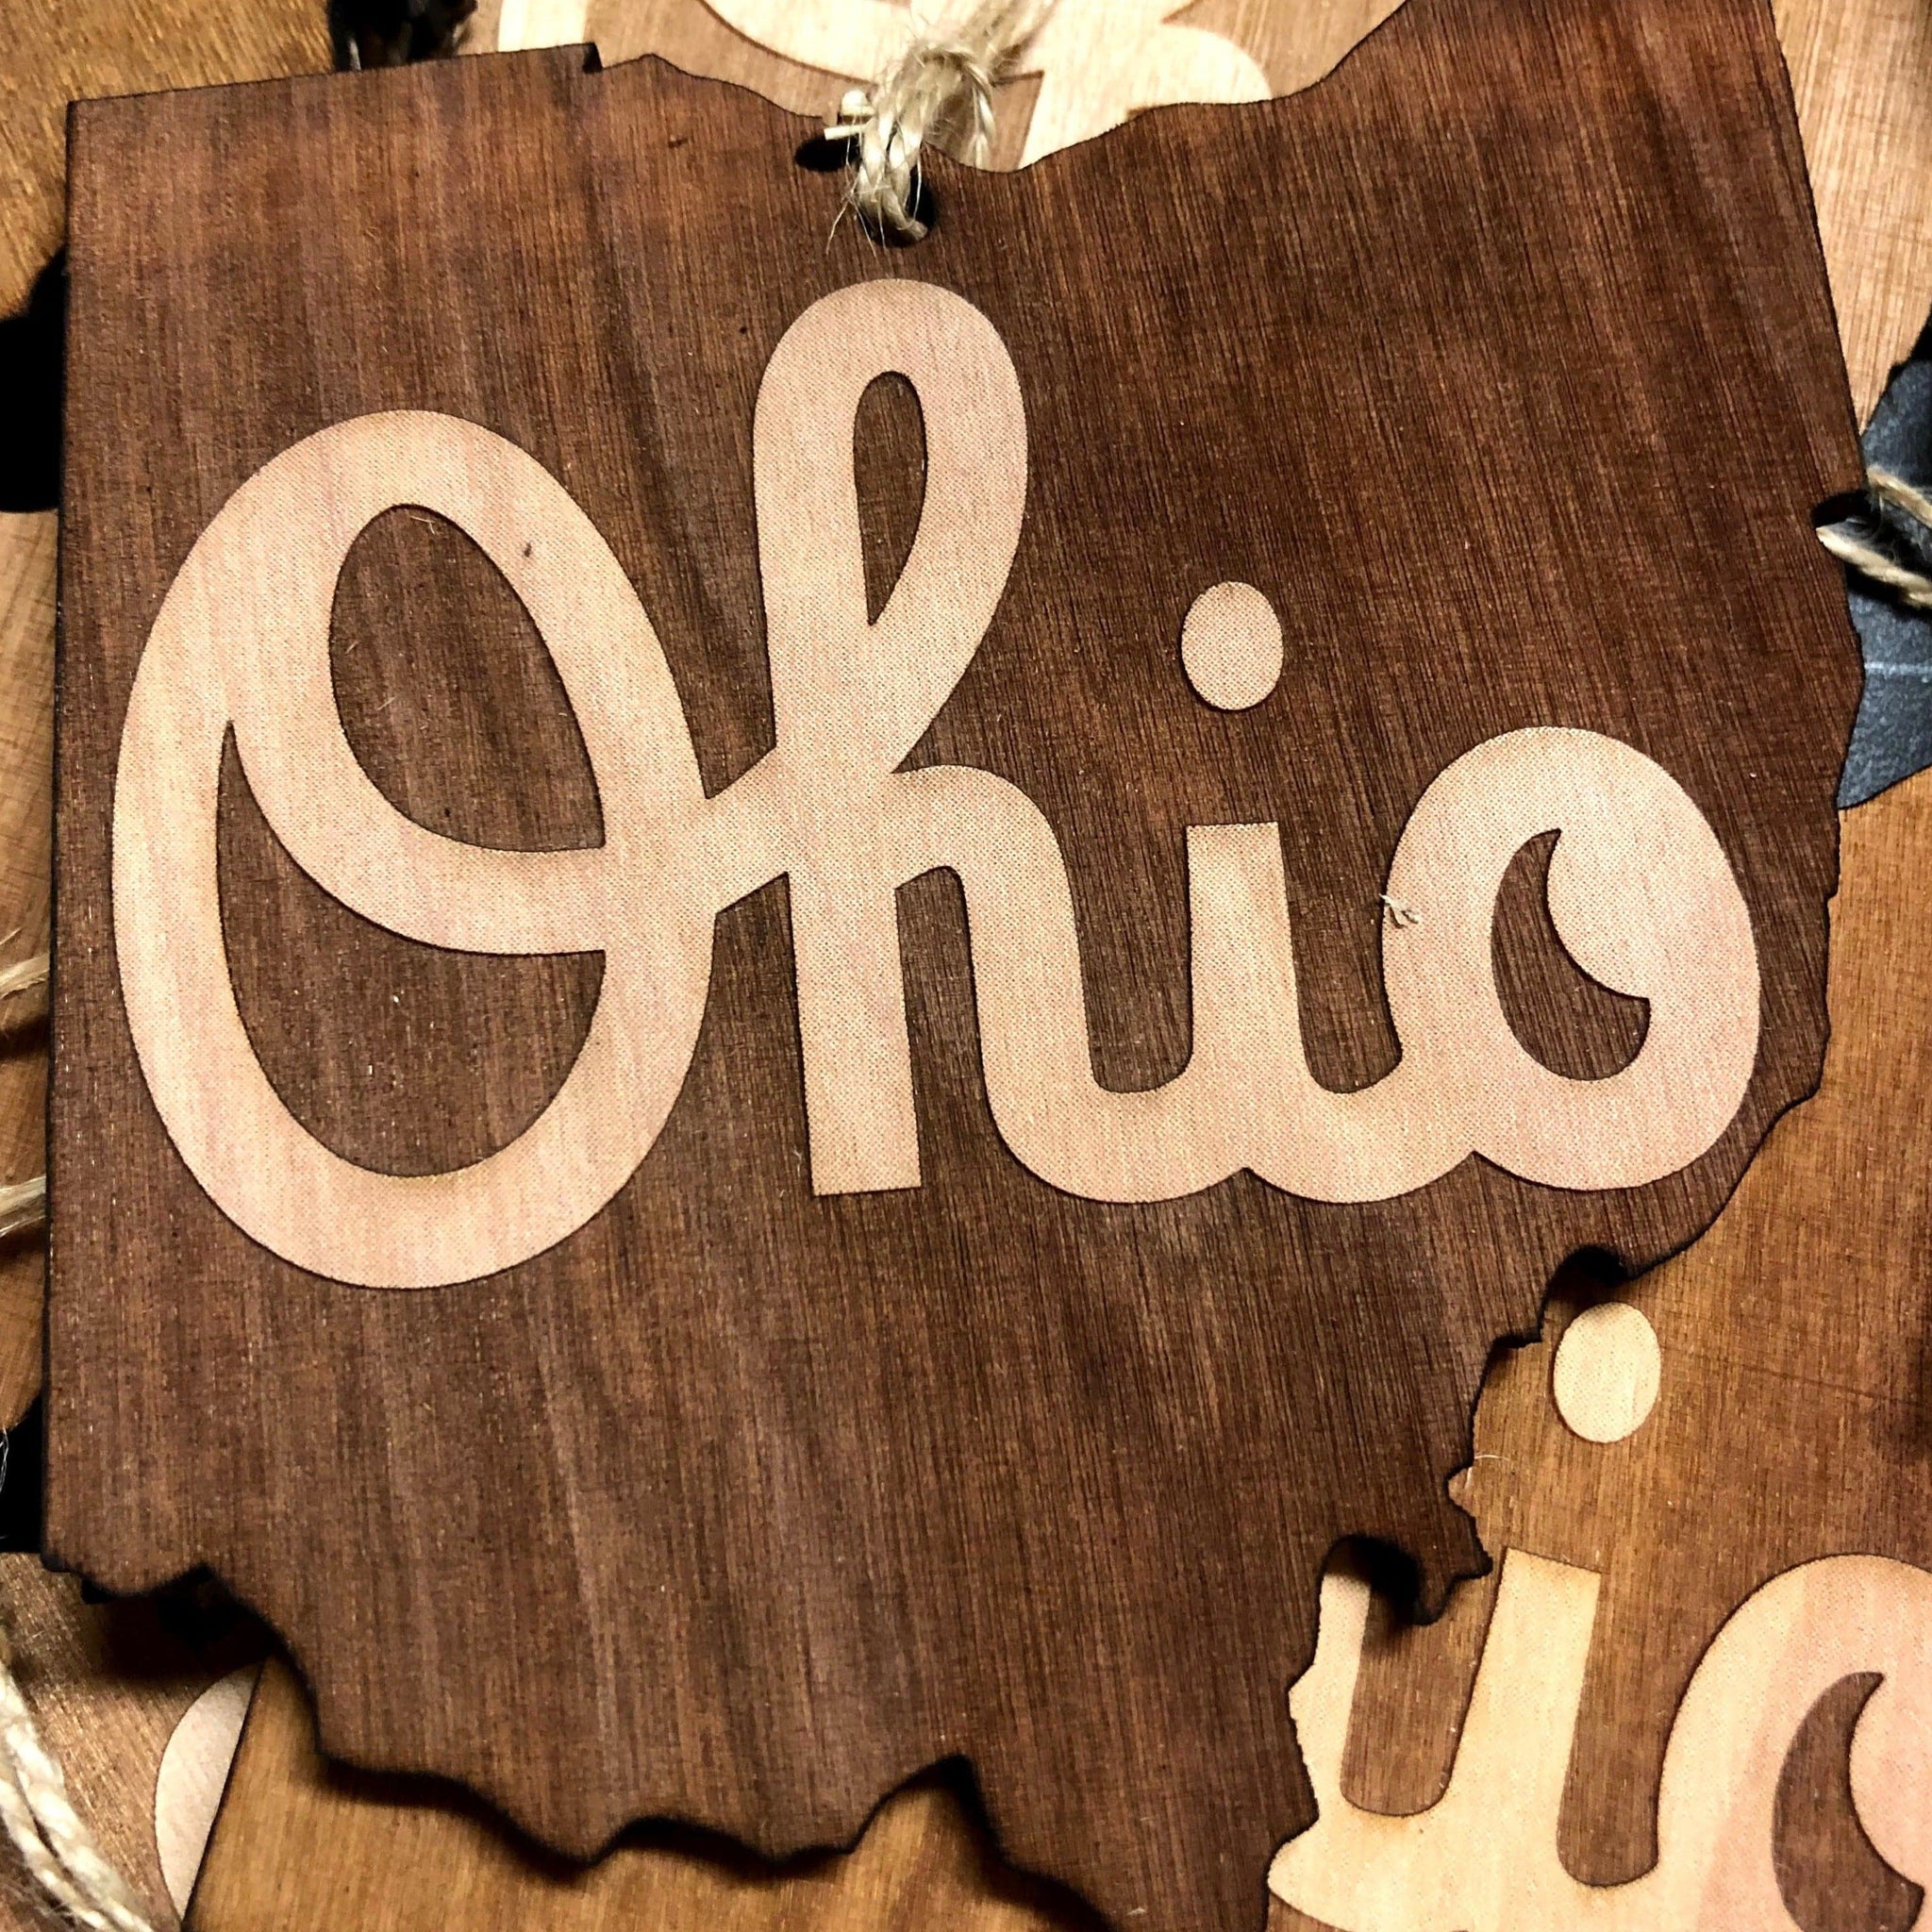 Script Ohio Shaped Wooden Ornament. Engraved Ohio Script Ornament. - C & A Engraving and Gifts